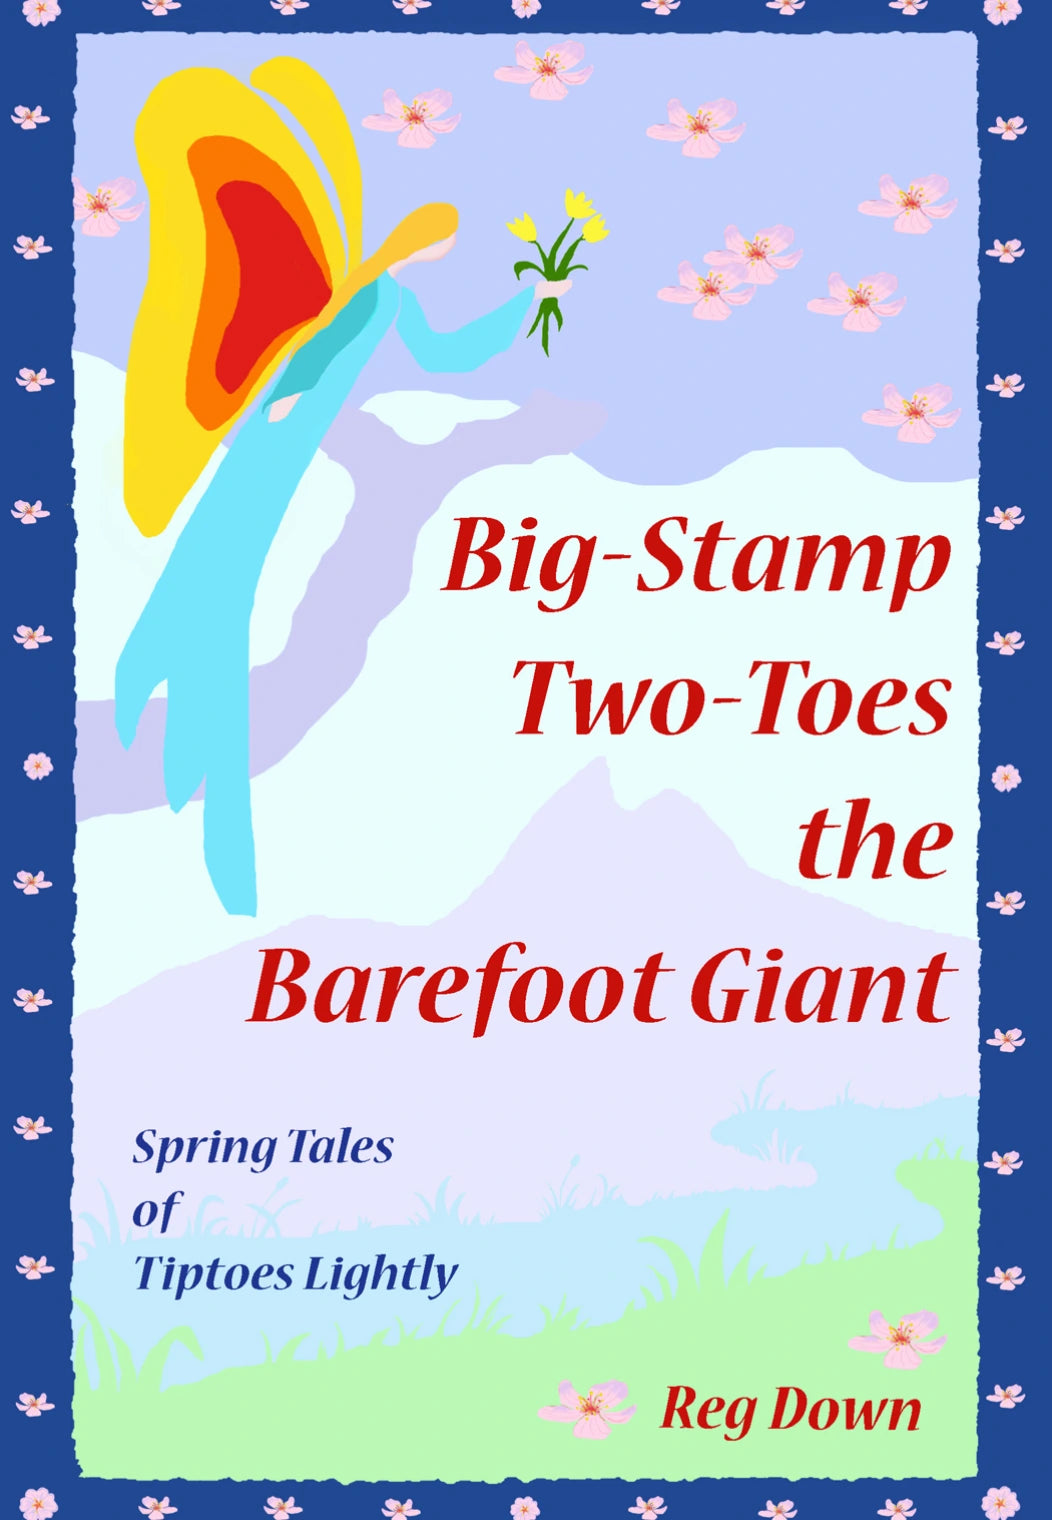 Spring Tales - Big Stamp Two Toes the Barefoot Giant by Reg Down - Alder & Alouette 